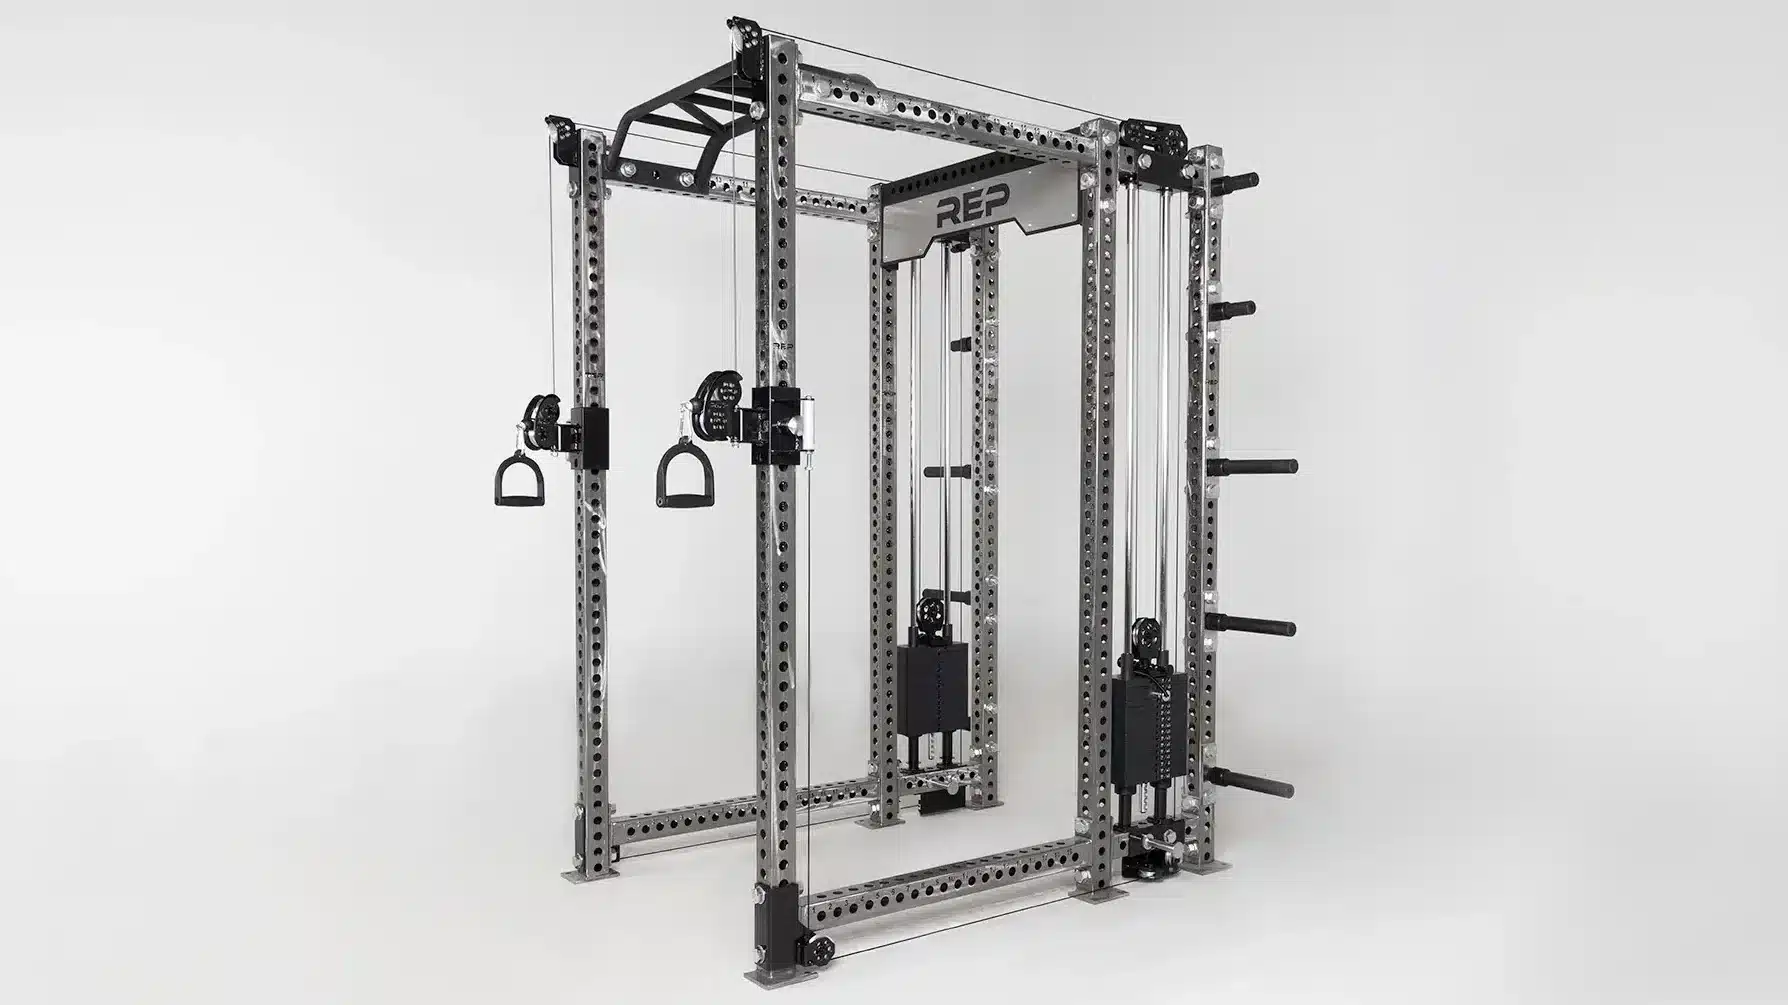 pr-4000 squat rack with cable systems built in